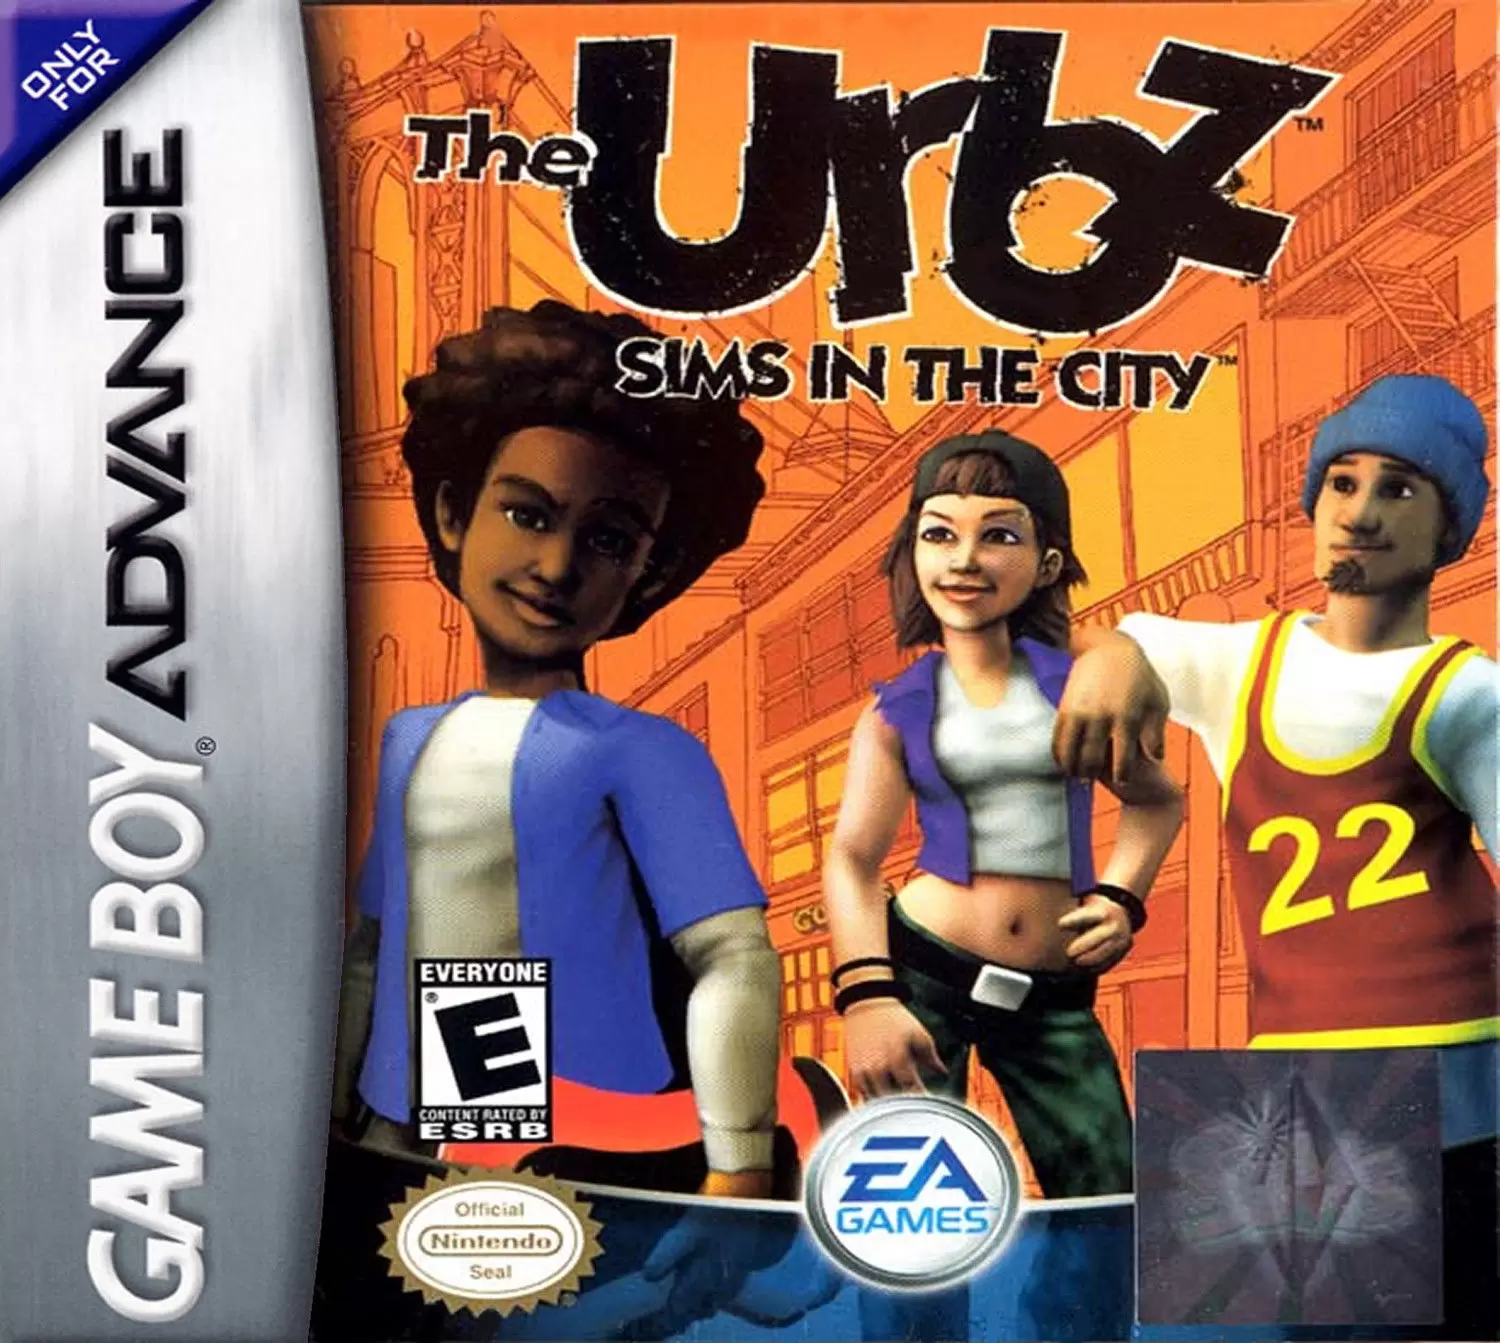 Game Boy Advance Games - The Urbz: Sims in the City